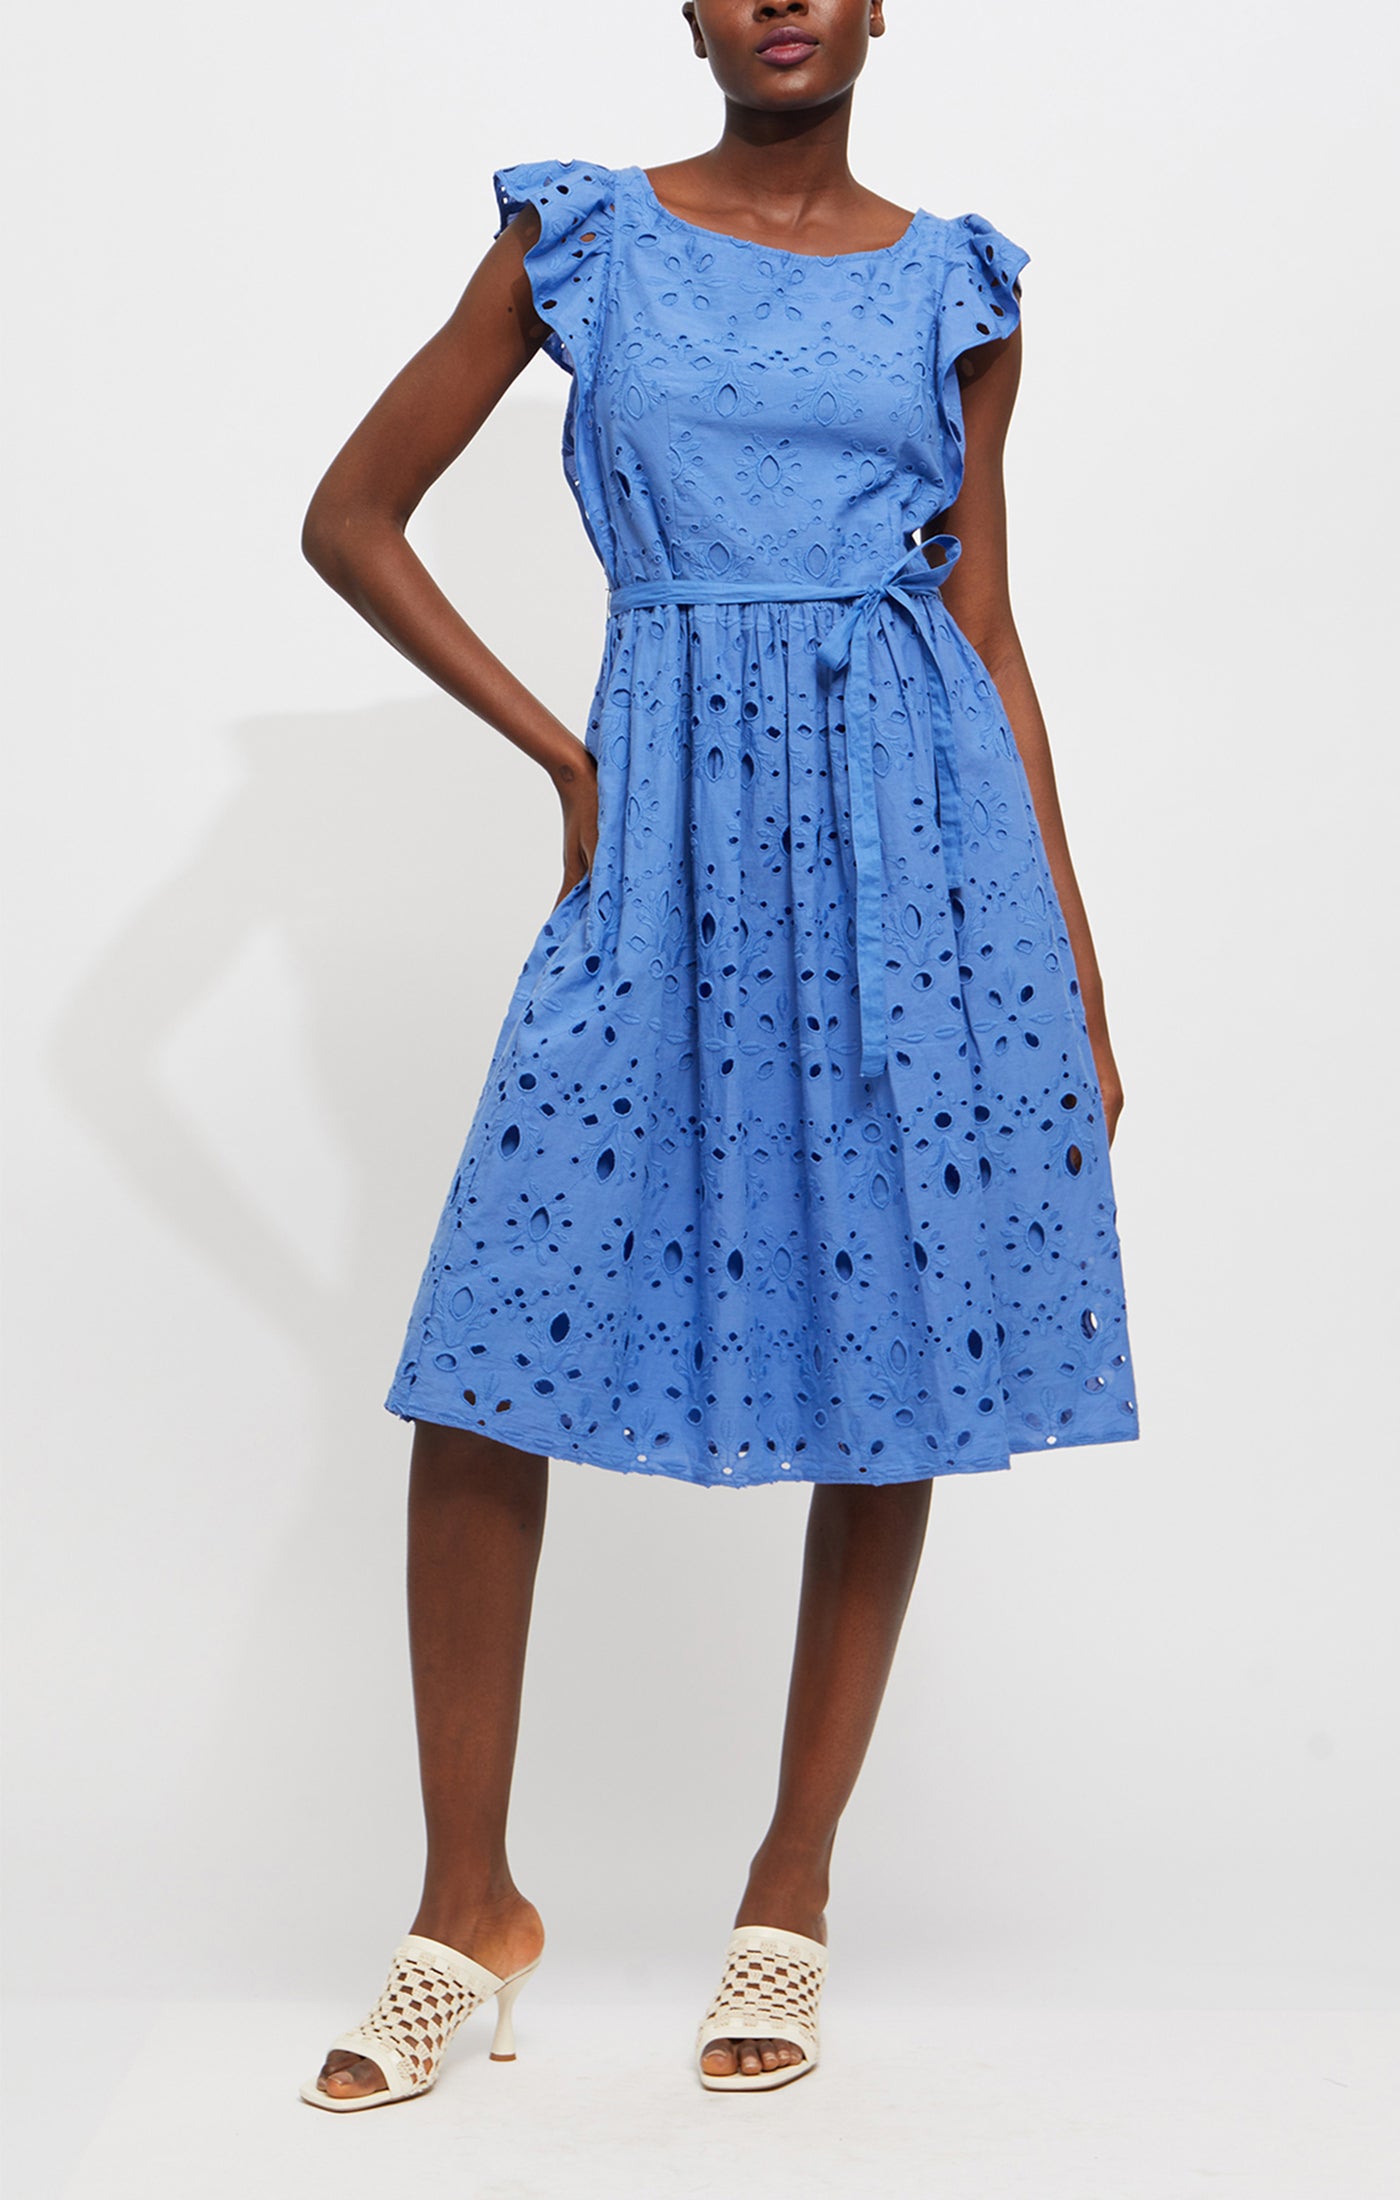 Cilla Broderie Anglaise Dress - French Connection